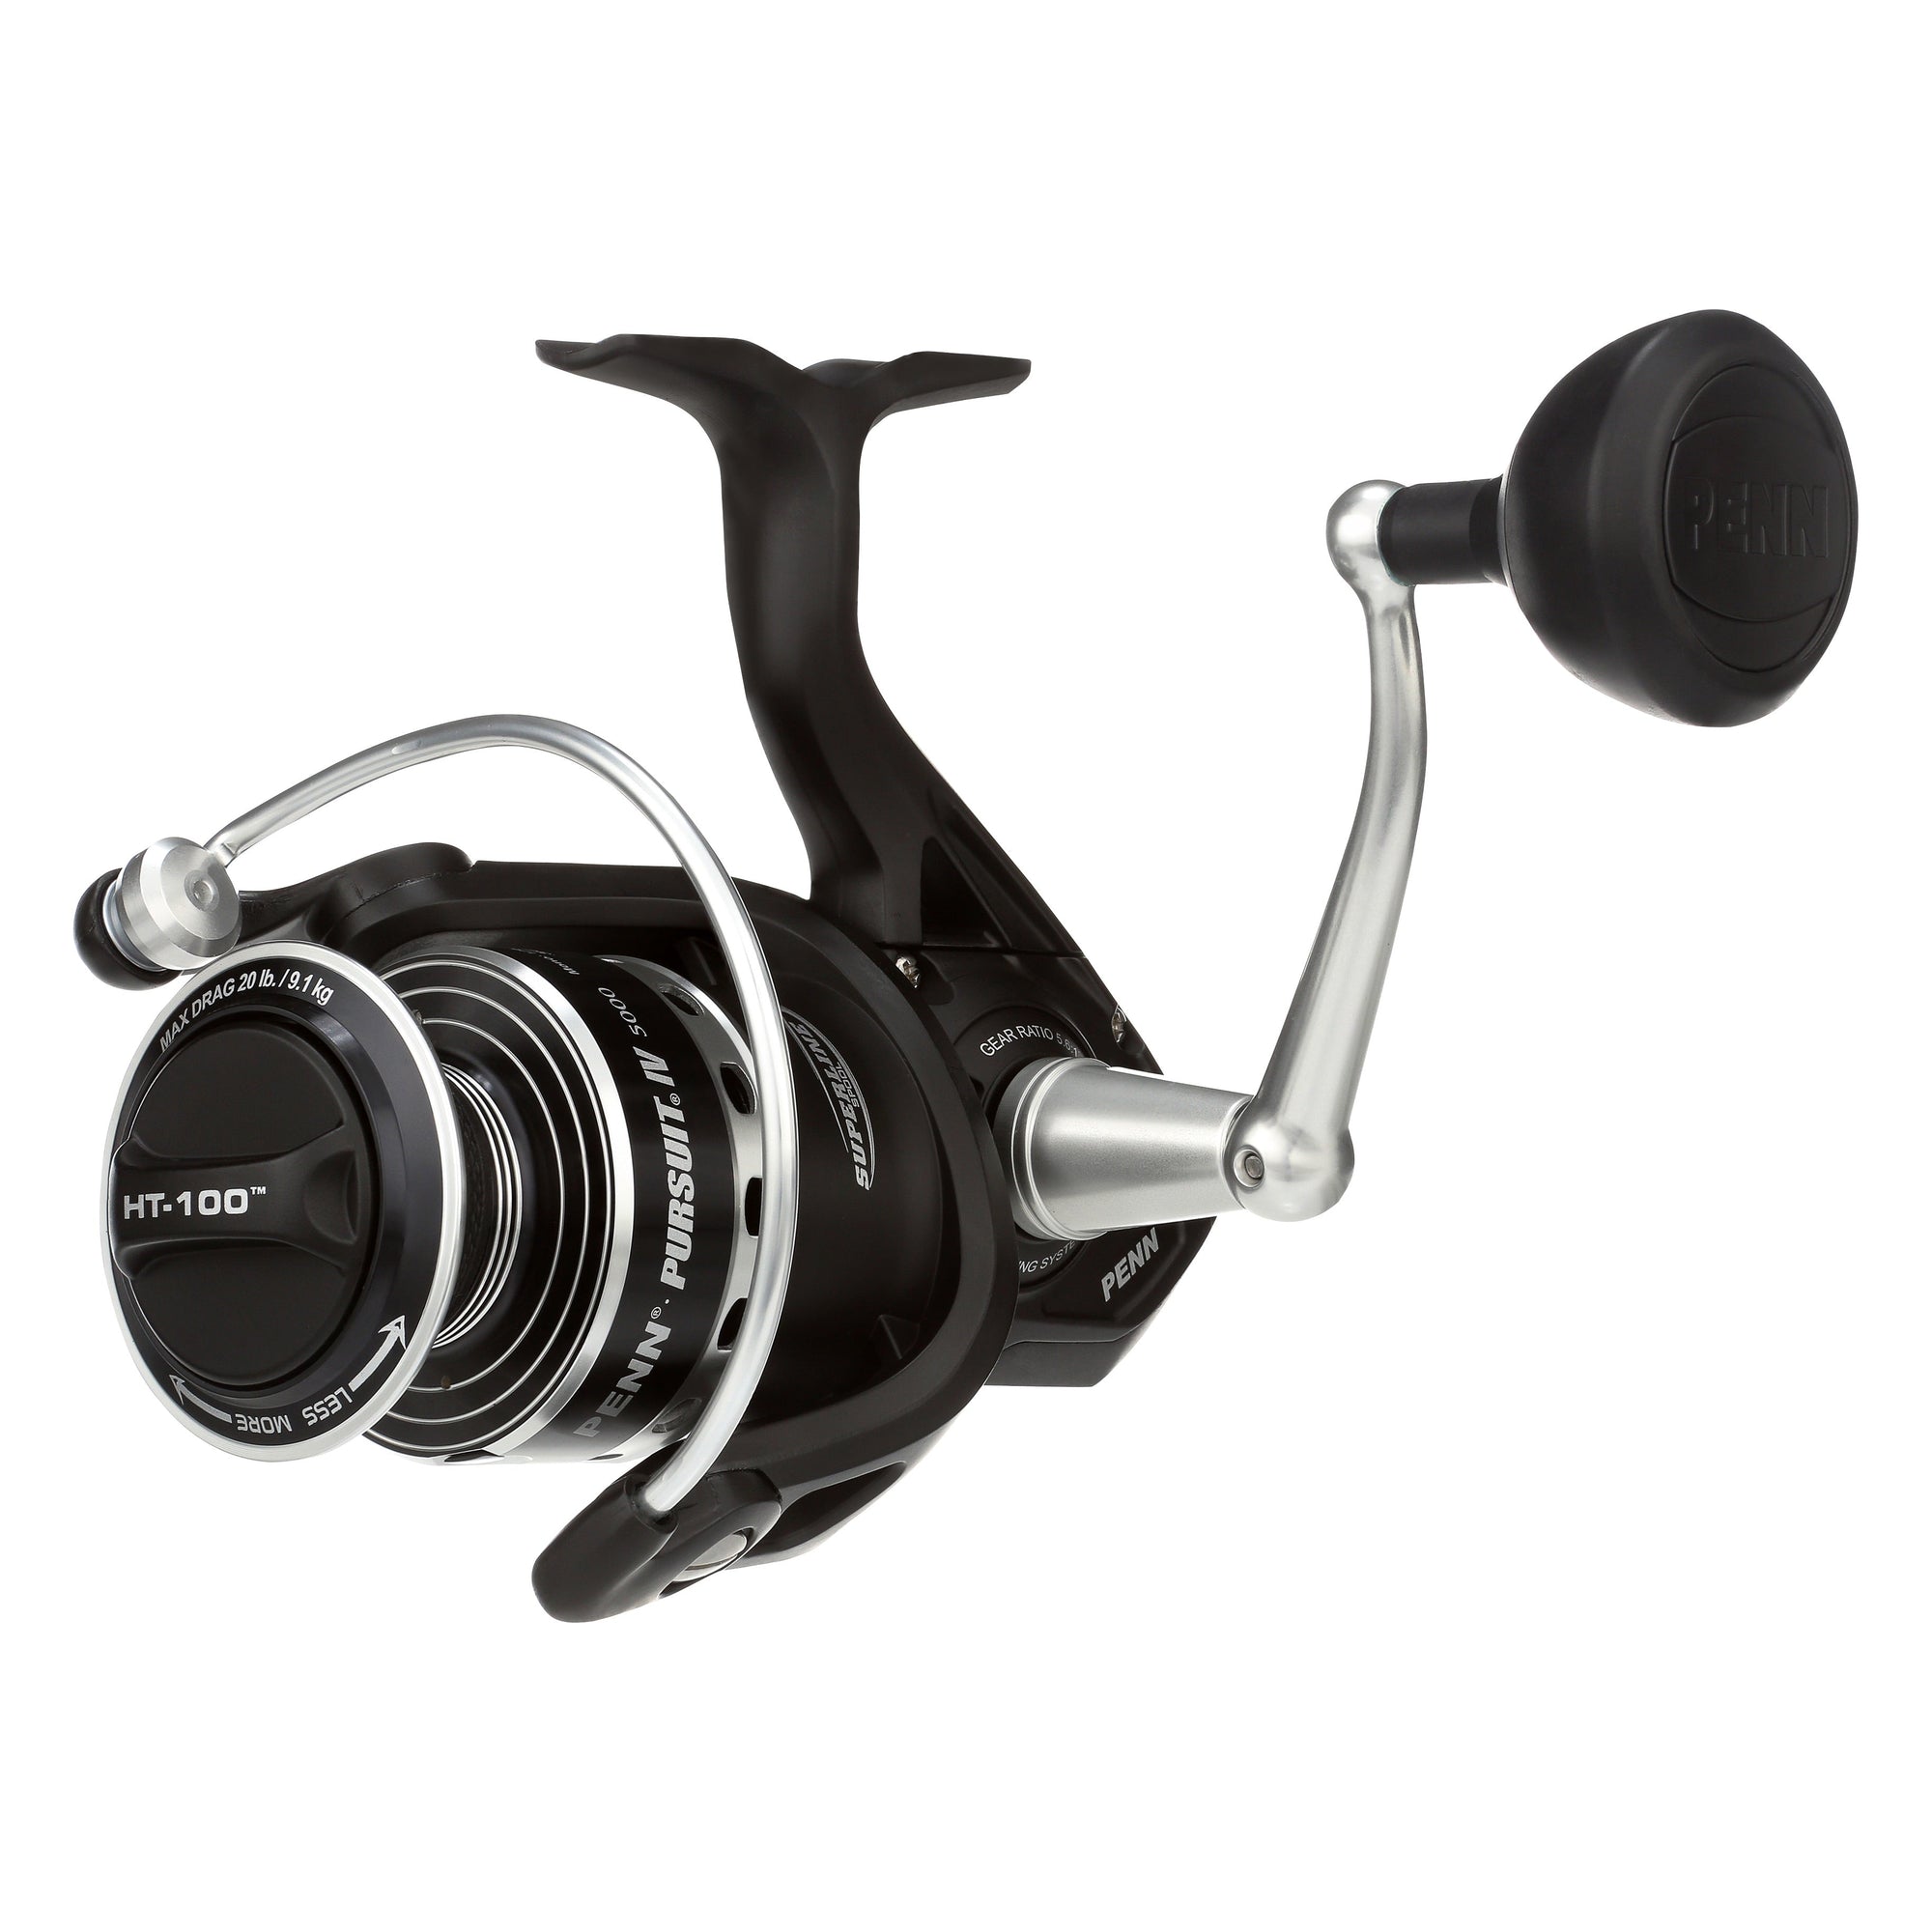 Penn Spinning Reel Covers from PENN - CHAOS Fishing